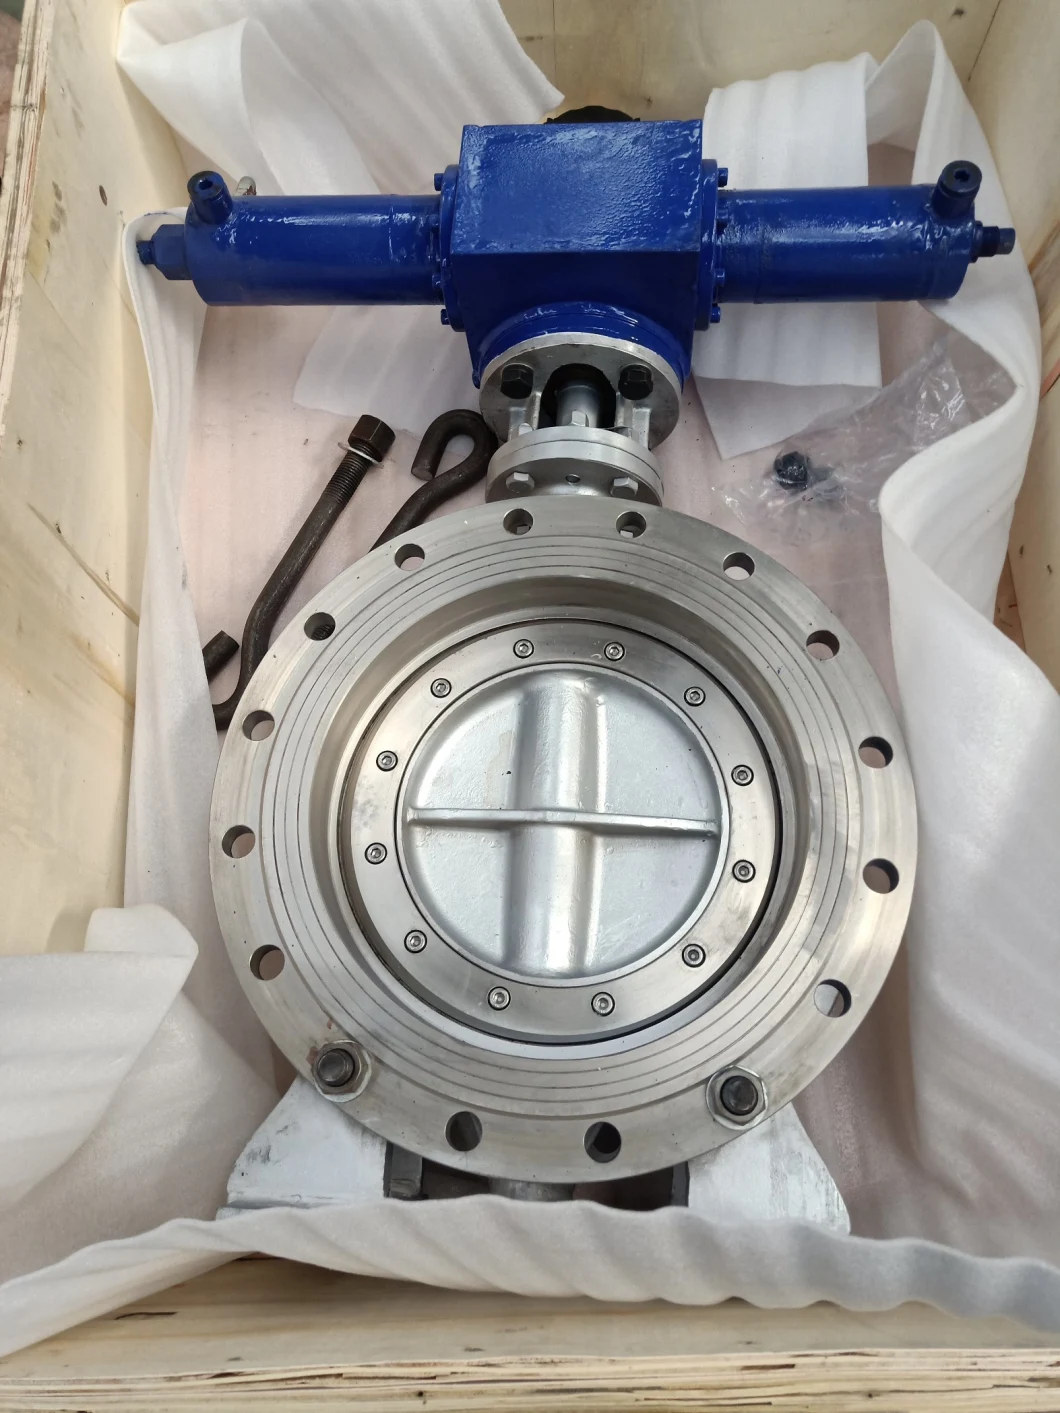 Pn10 Pn16 Wafer Type Butterfly Valve Cast Iron Stainless Steel Wafer Lug Butterfly Valve